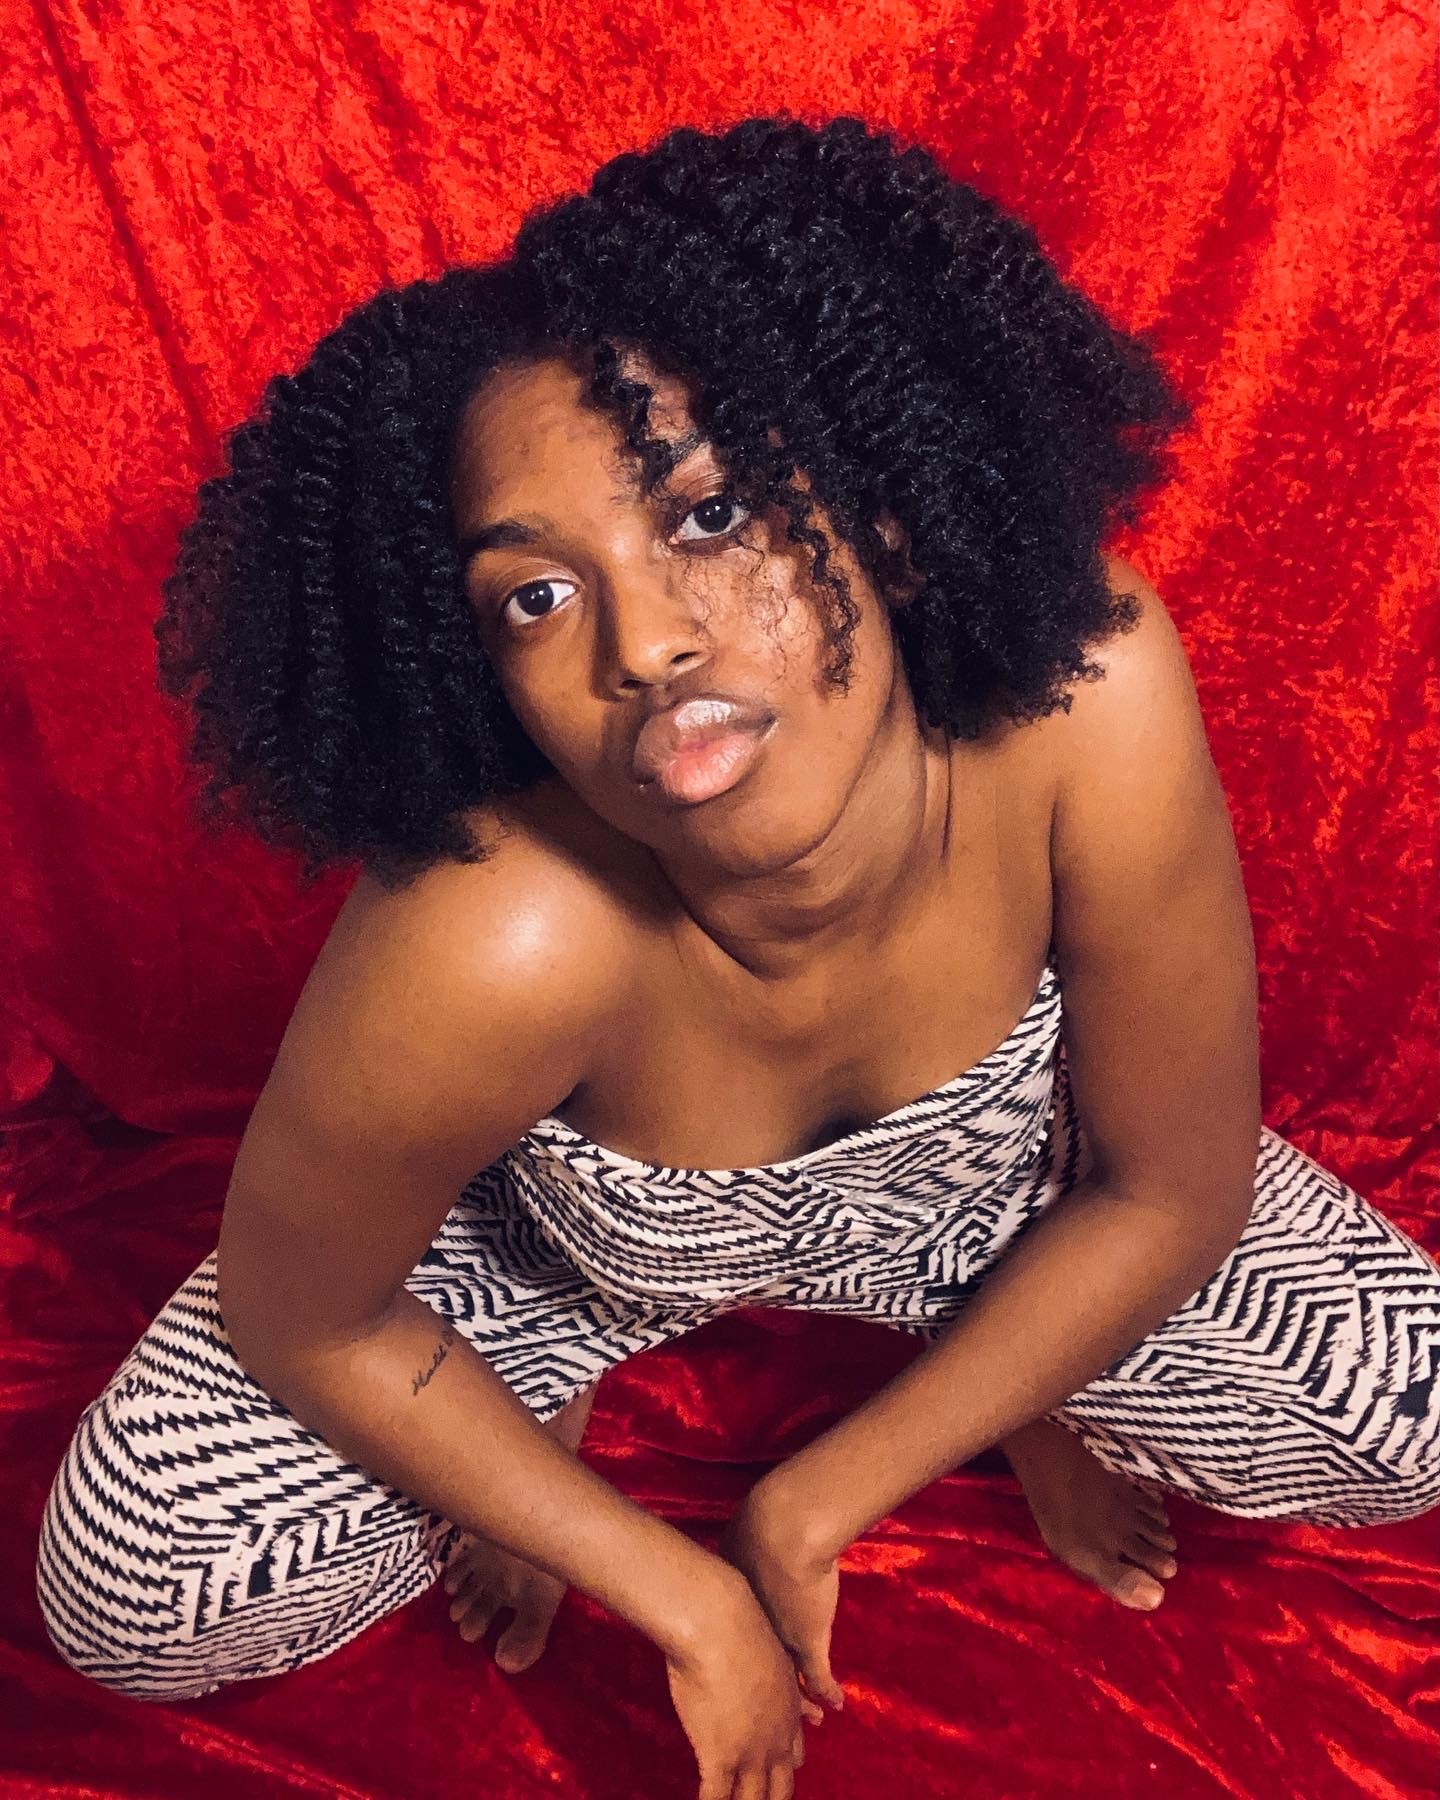 A Black woman crouching on a red photo studio backdrop and looking up at the camera. She has curly hair parted in the middle and wears a shoulderless jumpsuit with a black-and-white zigzag pattern.